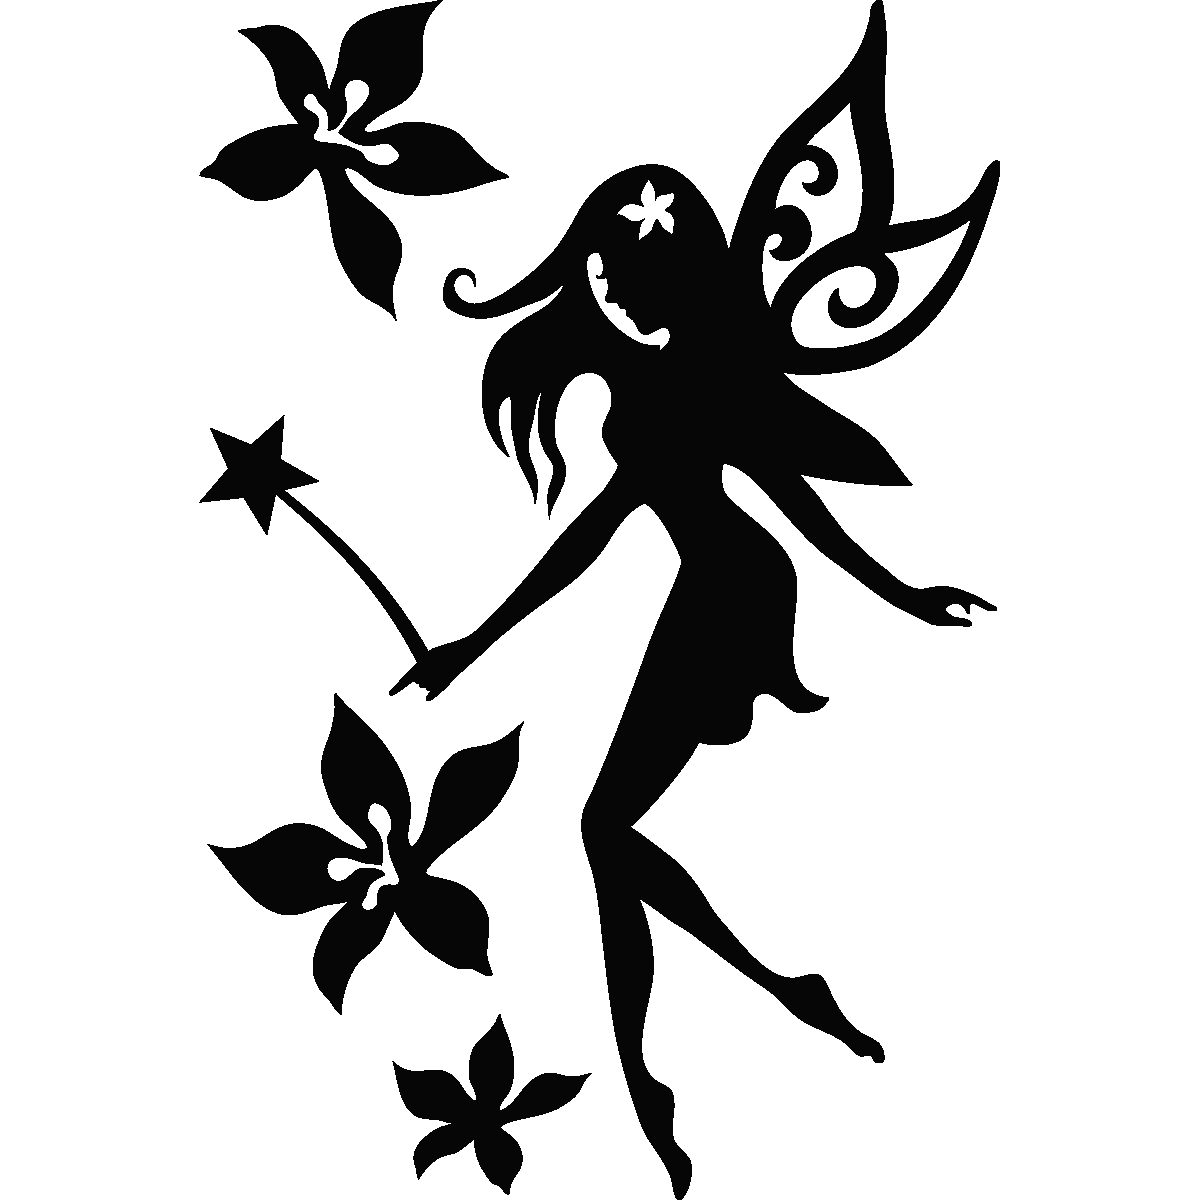 Tinkerbell Black and White Logo - Fairy on a flower download - RR collections